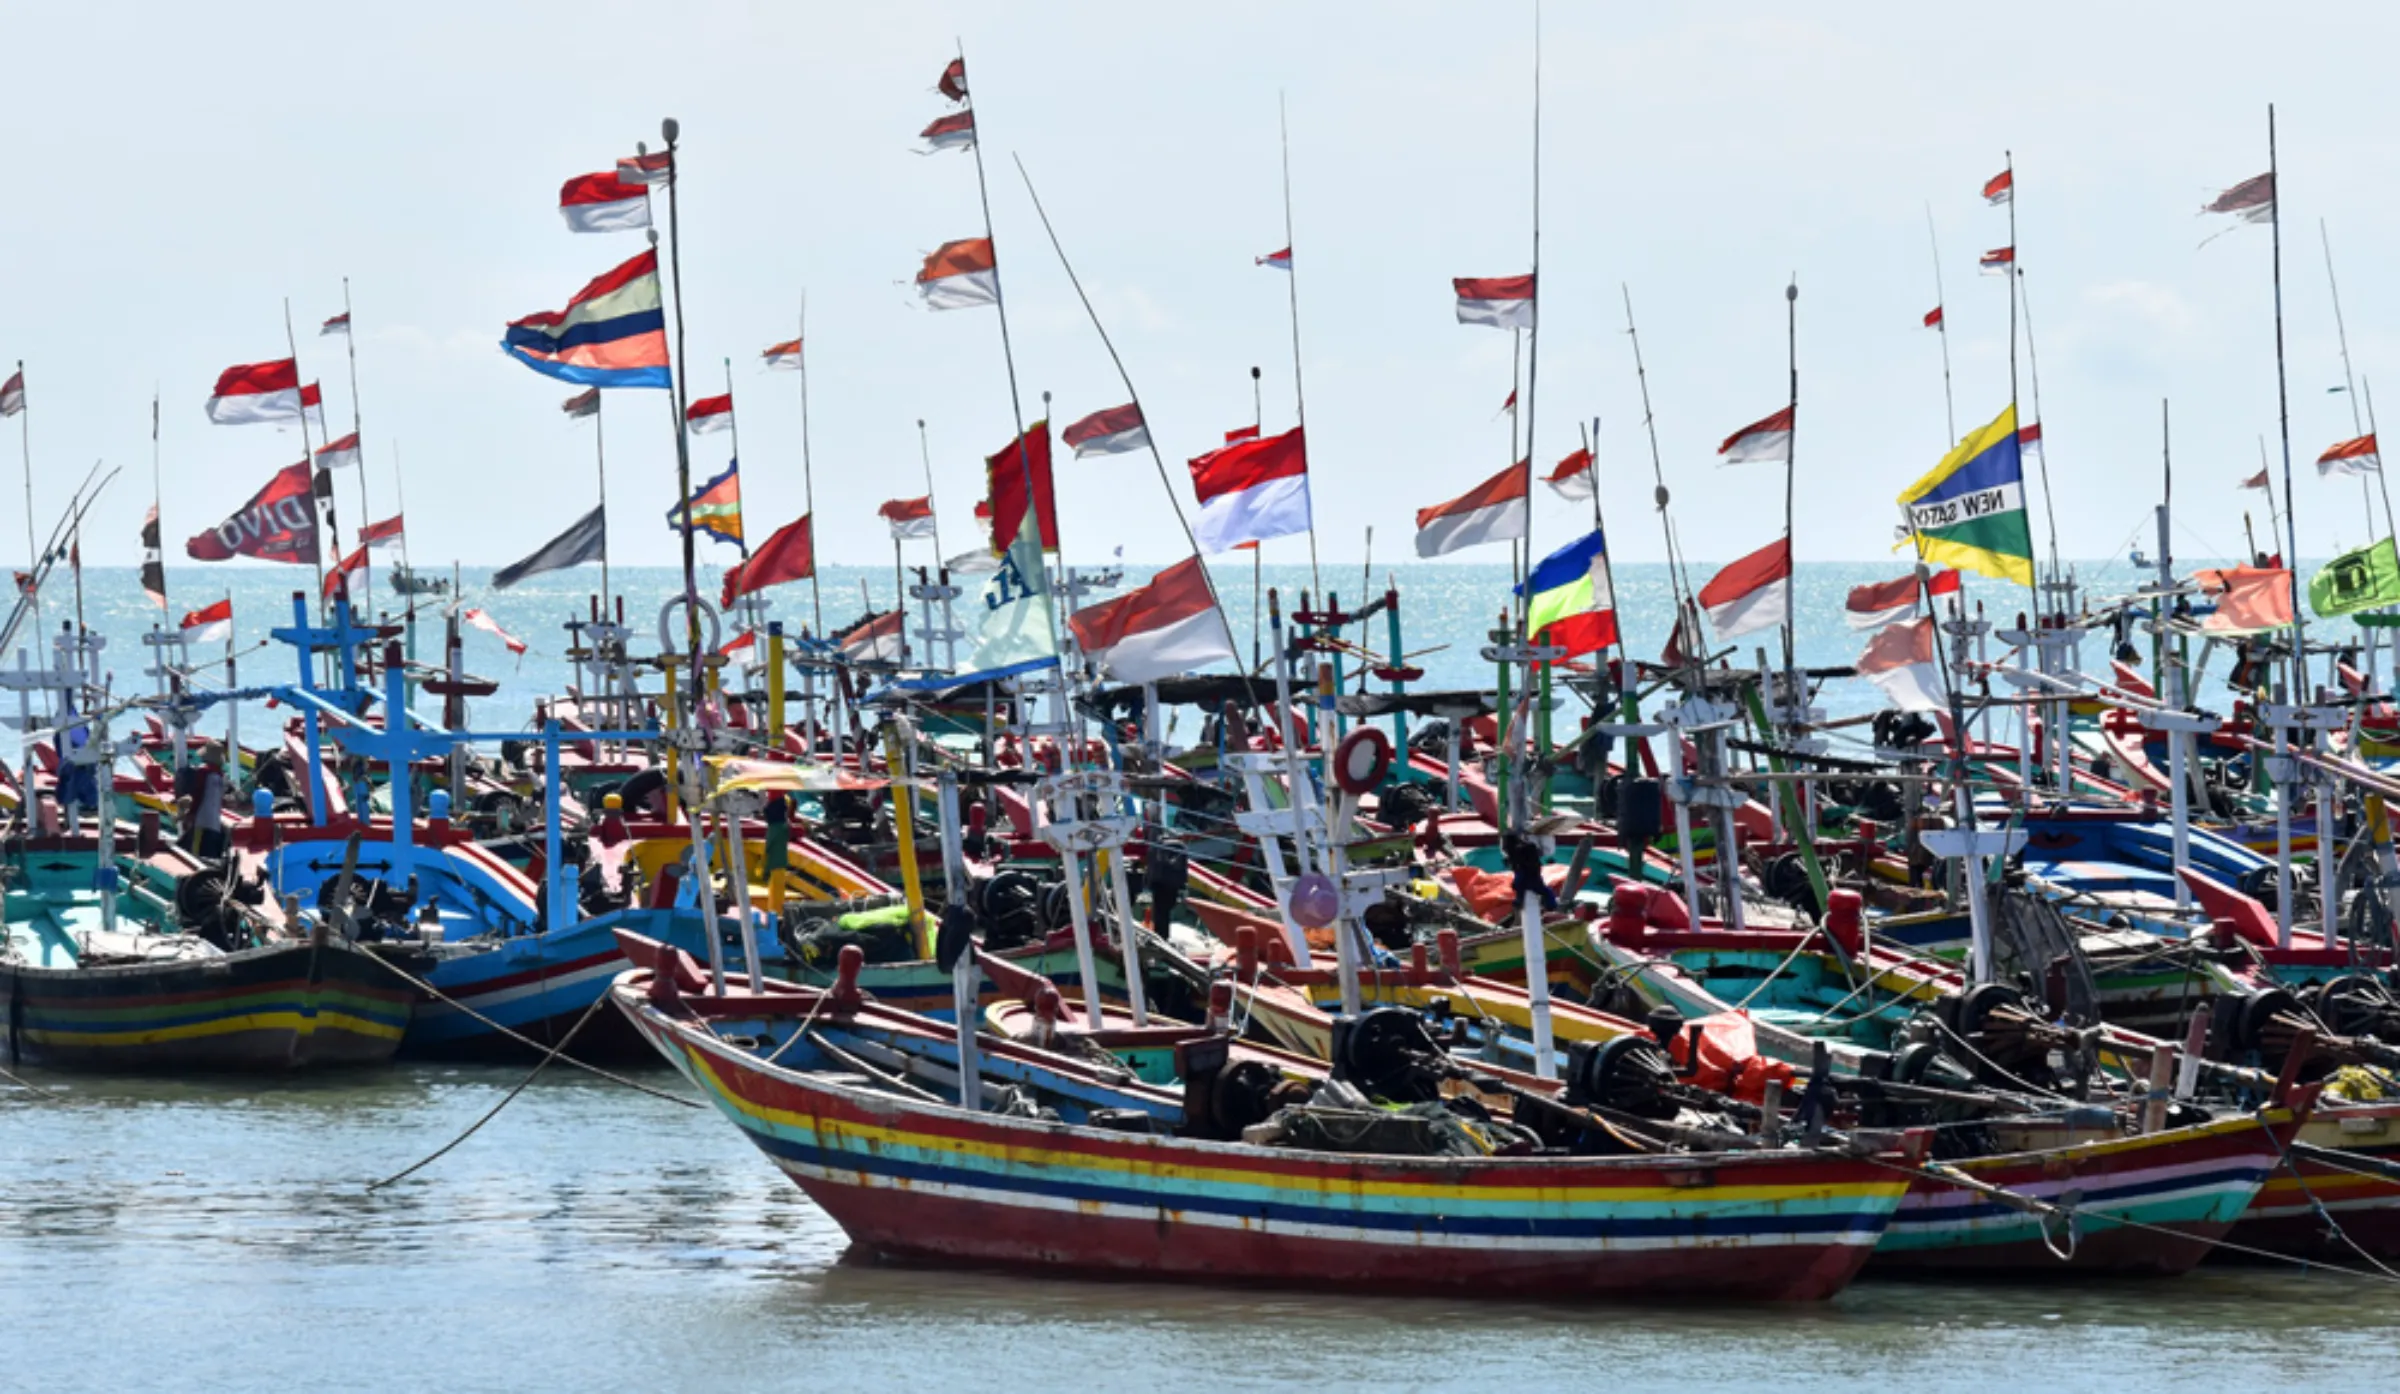 Rows of fishing boats are docked at the port of Tanjung Bonang, in Rembang regency, Indonesia, August 12, 2022